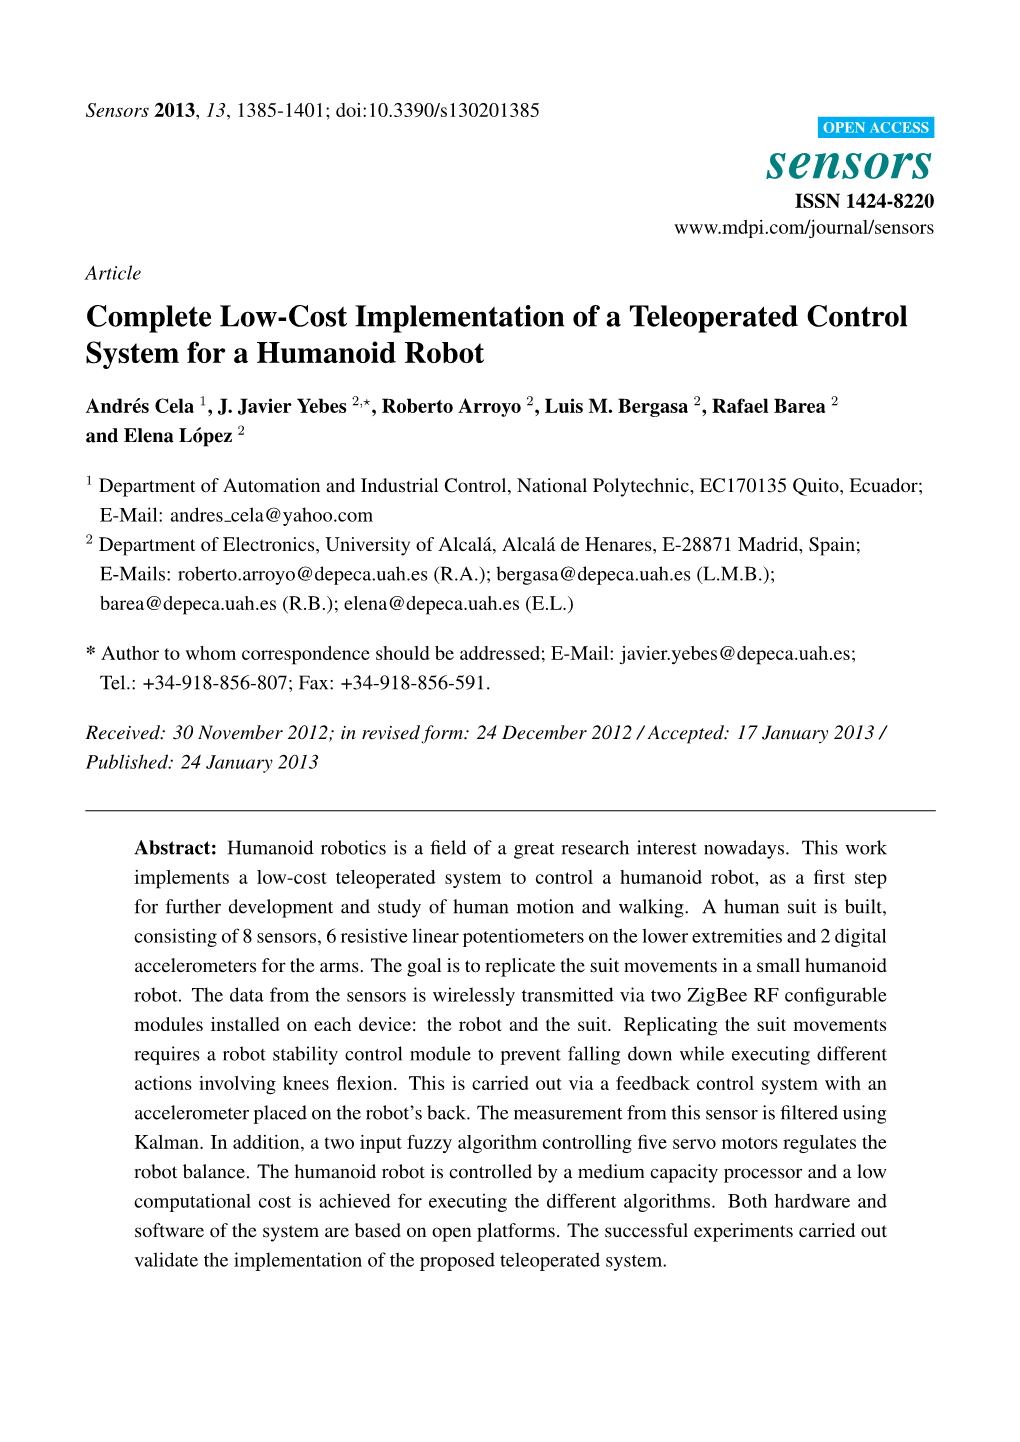 Complete Low-Cost Implementation of a Teleoperated Control System for a Humanoid Robot